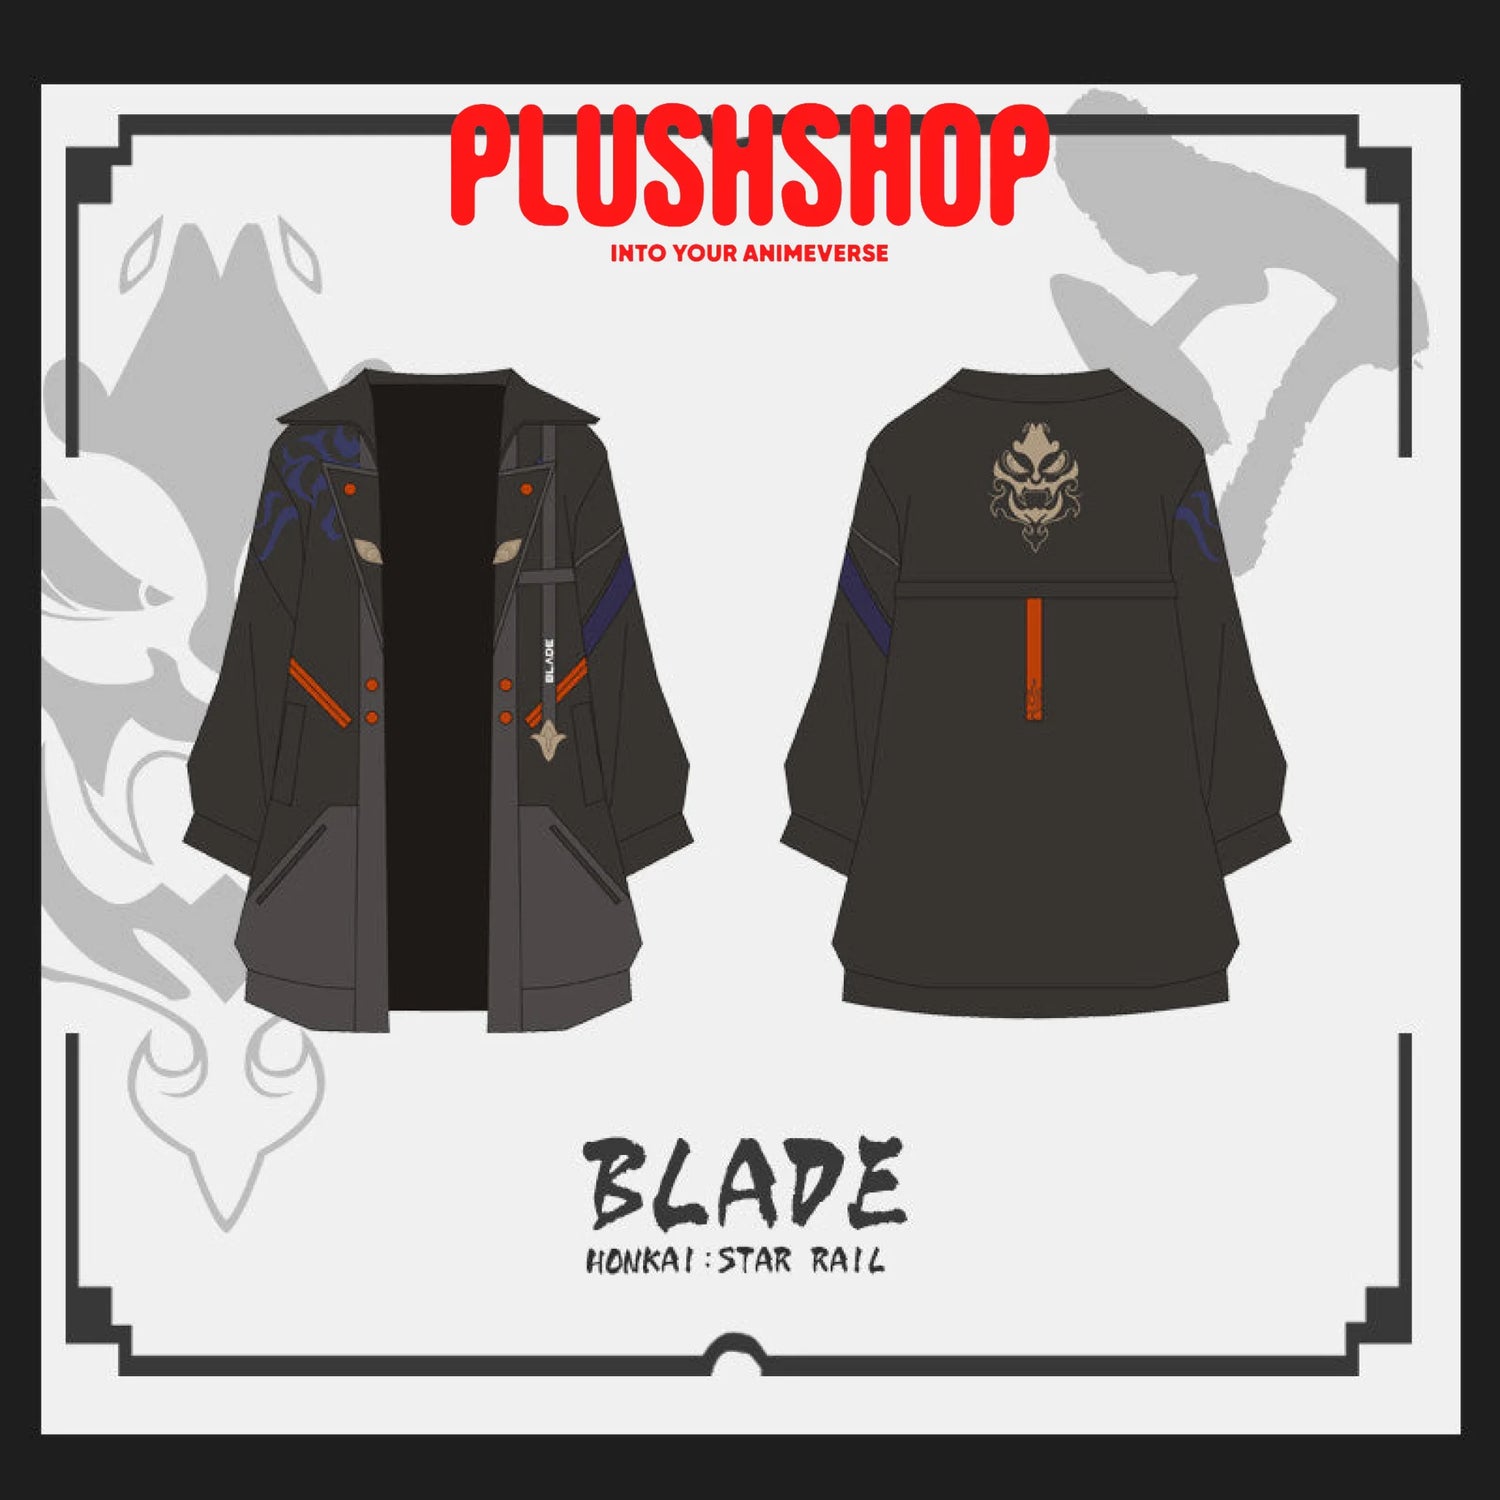 Honkai Starrail Game Character Blade Design Element Cosplay Outfit Jacket Sweater Pants Fleece 服装